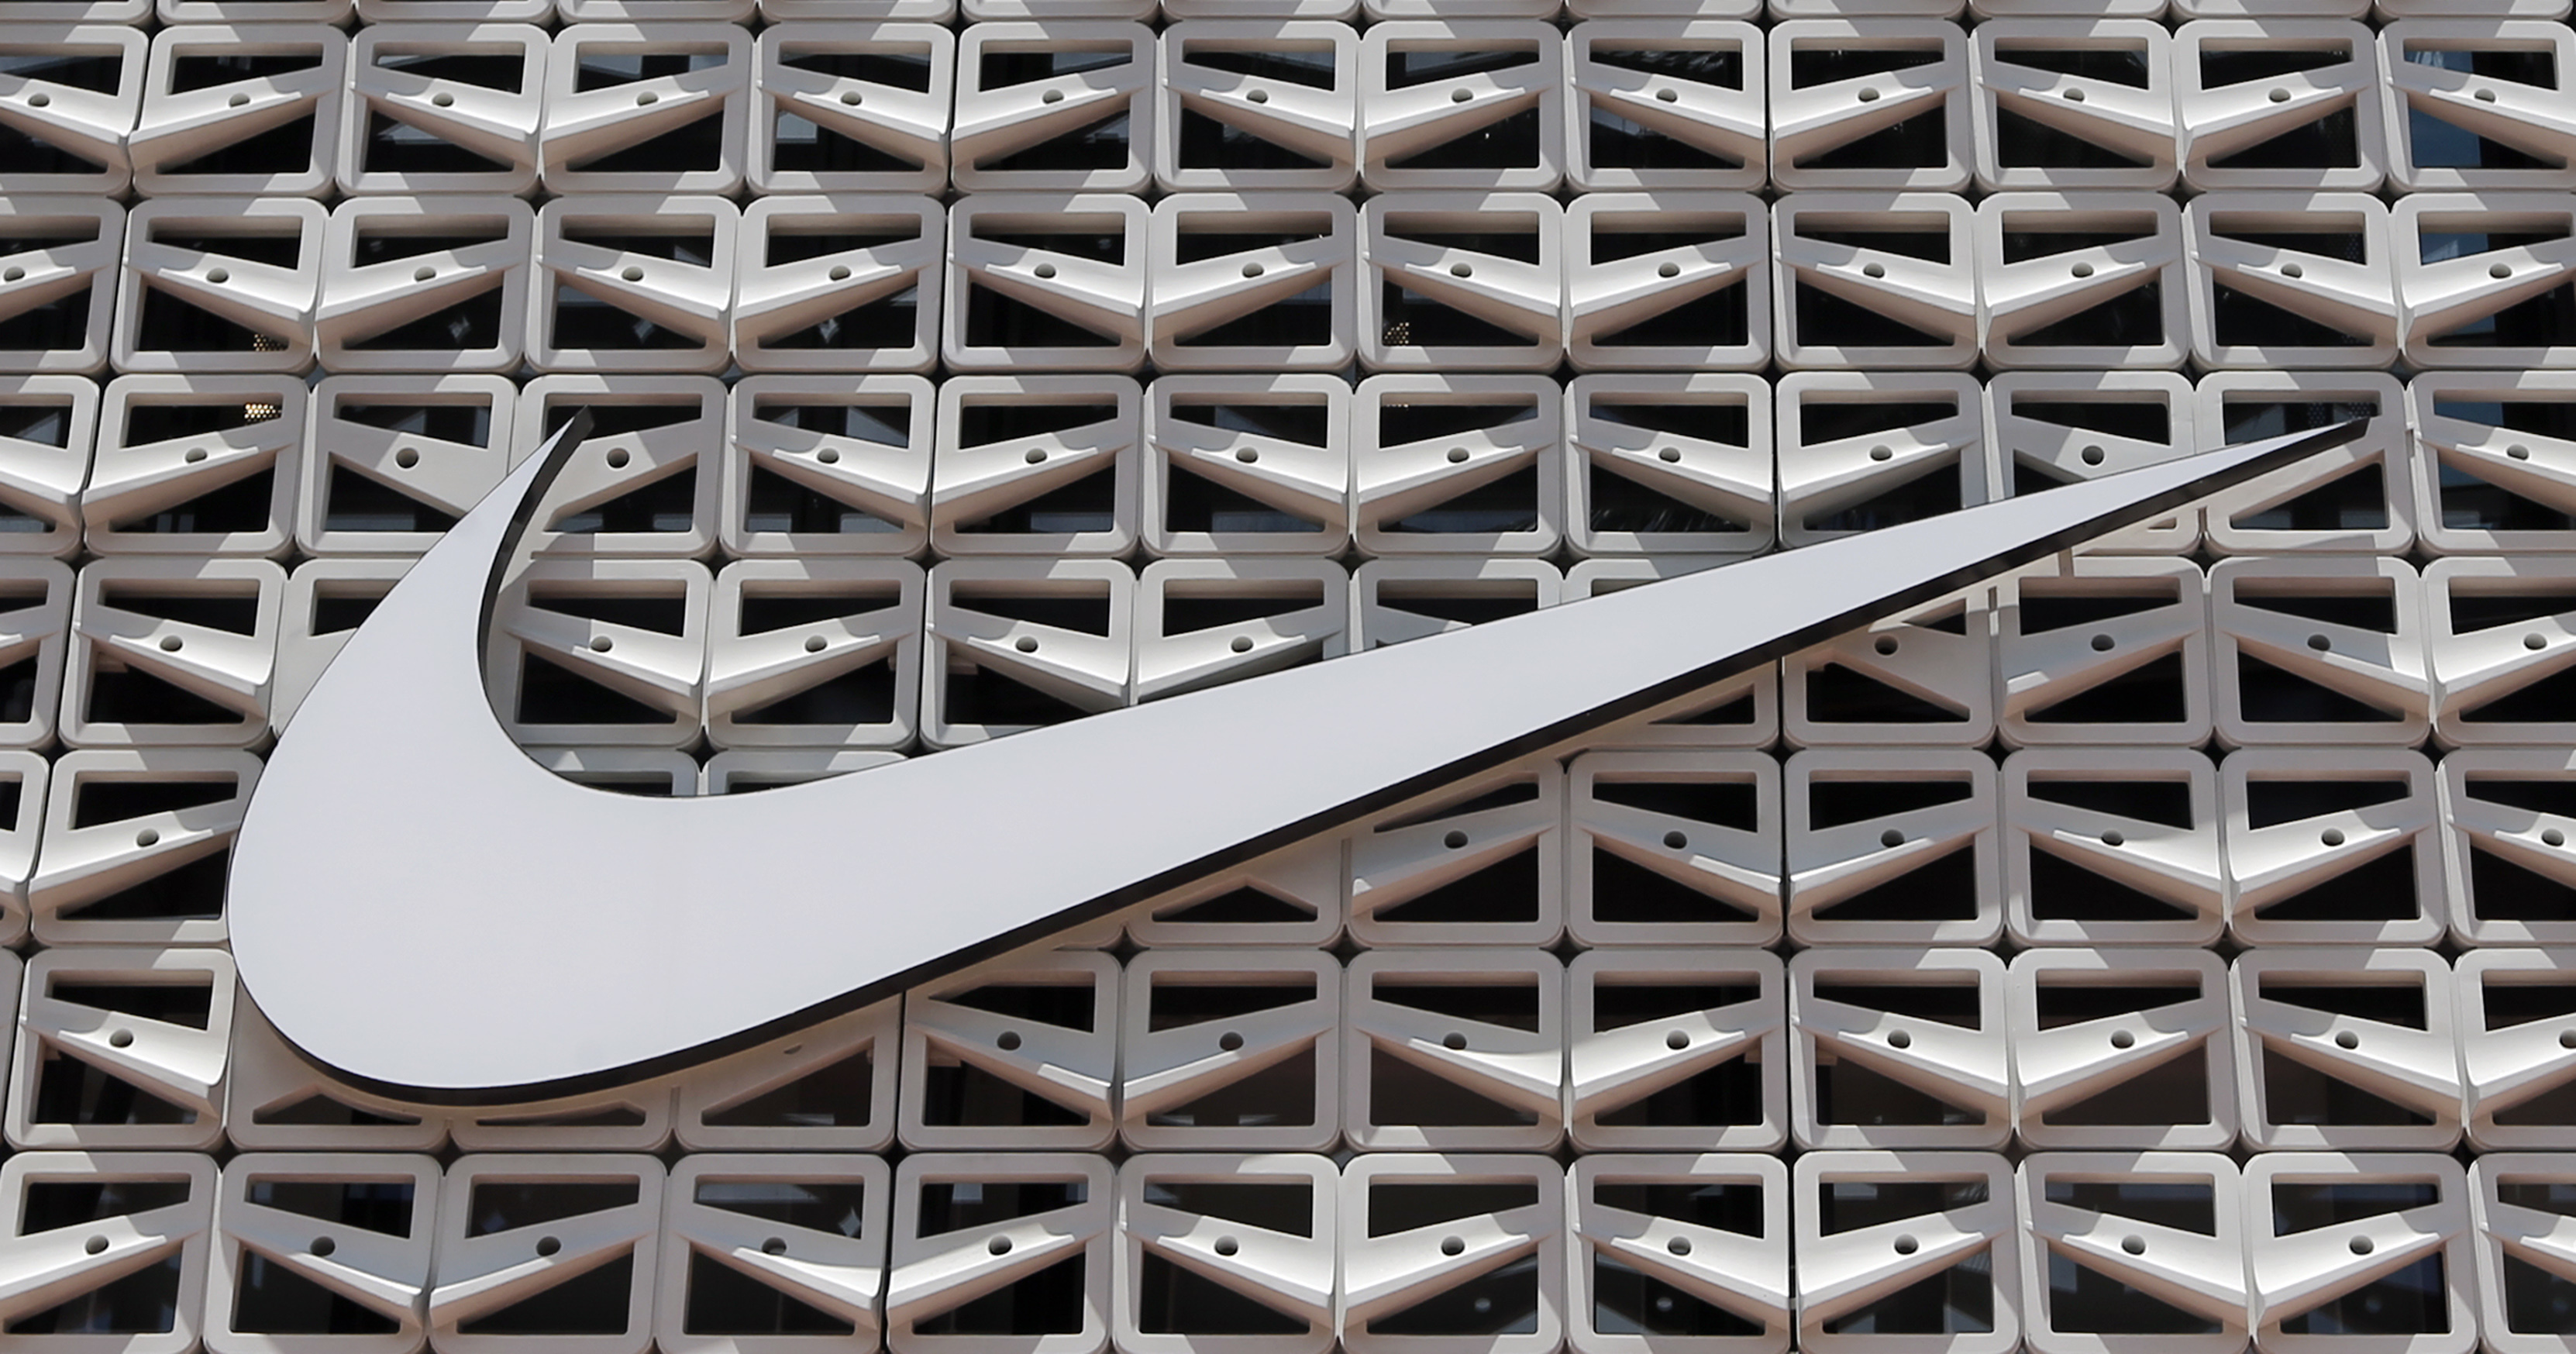 Report: Nike to Fire Employees Who Can't Prove Vaccination Against COVID-19